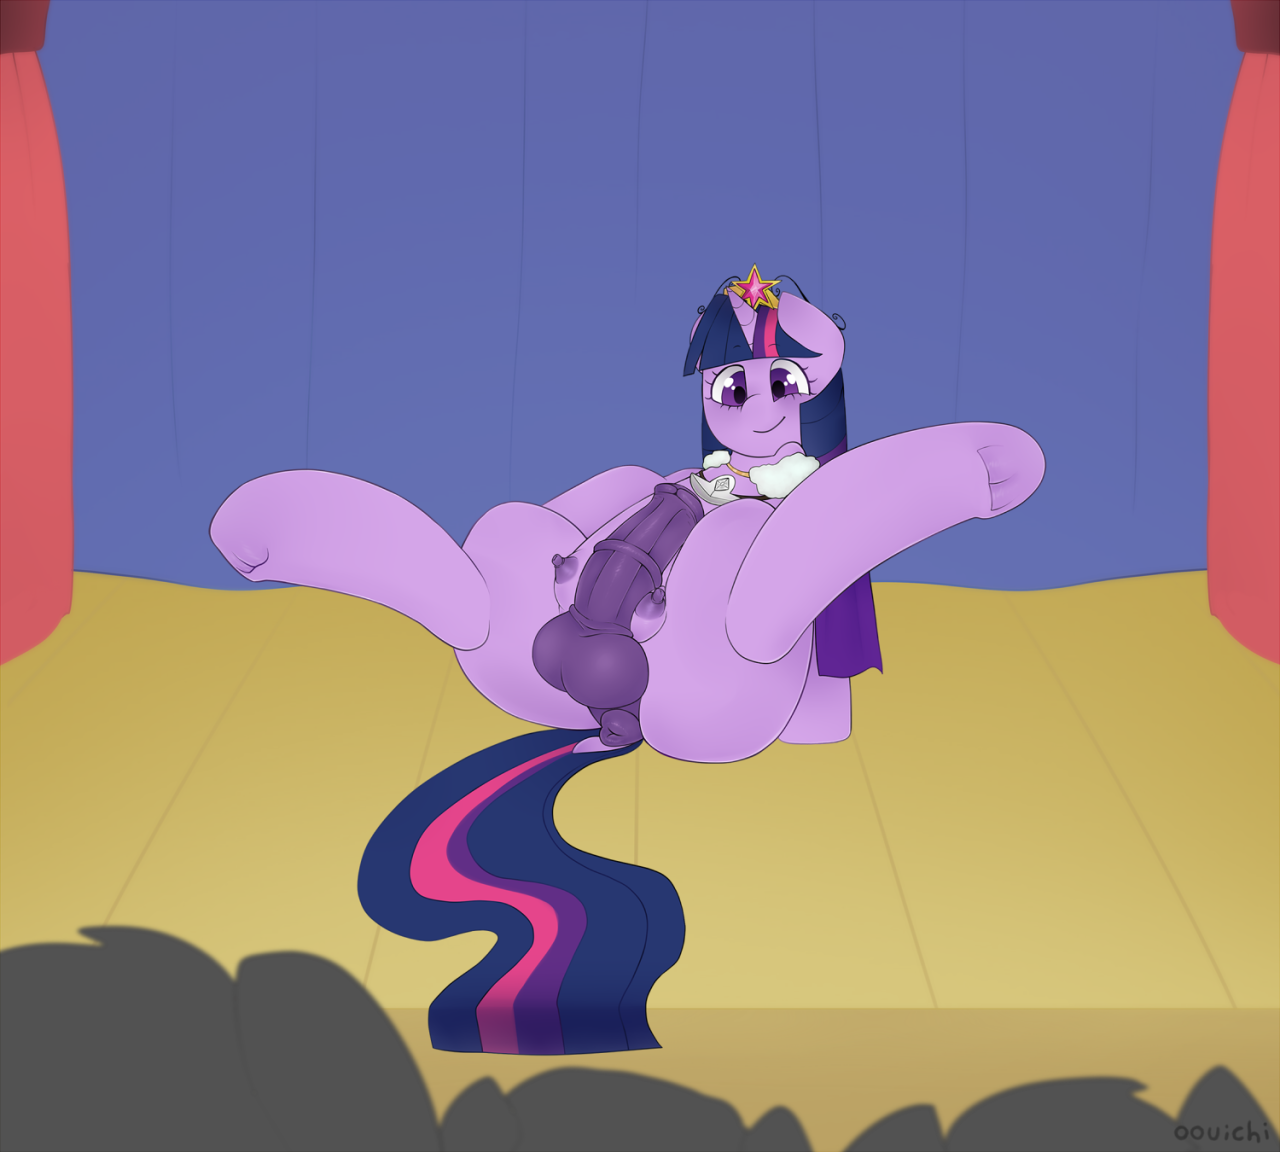 Twilight won a magical amulet in a battle against Trixie, and is now reaping the